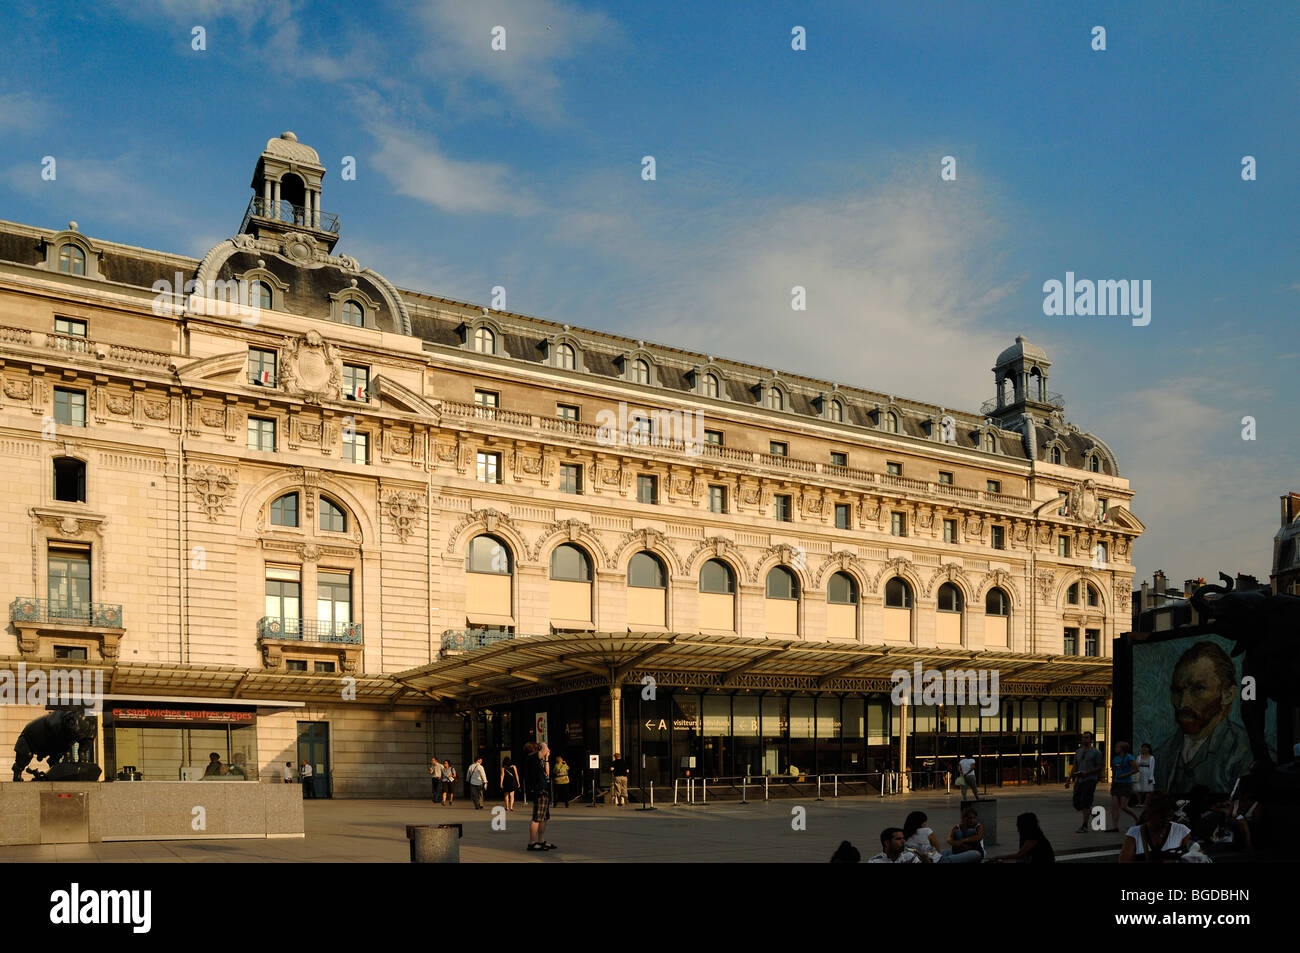 Exterior of Main Facade of the Musée d'Orsay Museum, a former Railway Station built 1898-1900, Paris, France Stock Photo